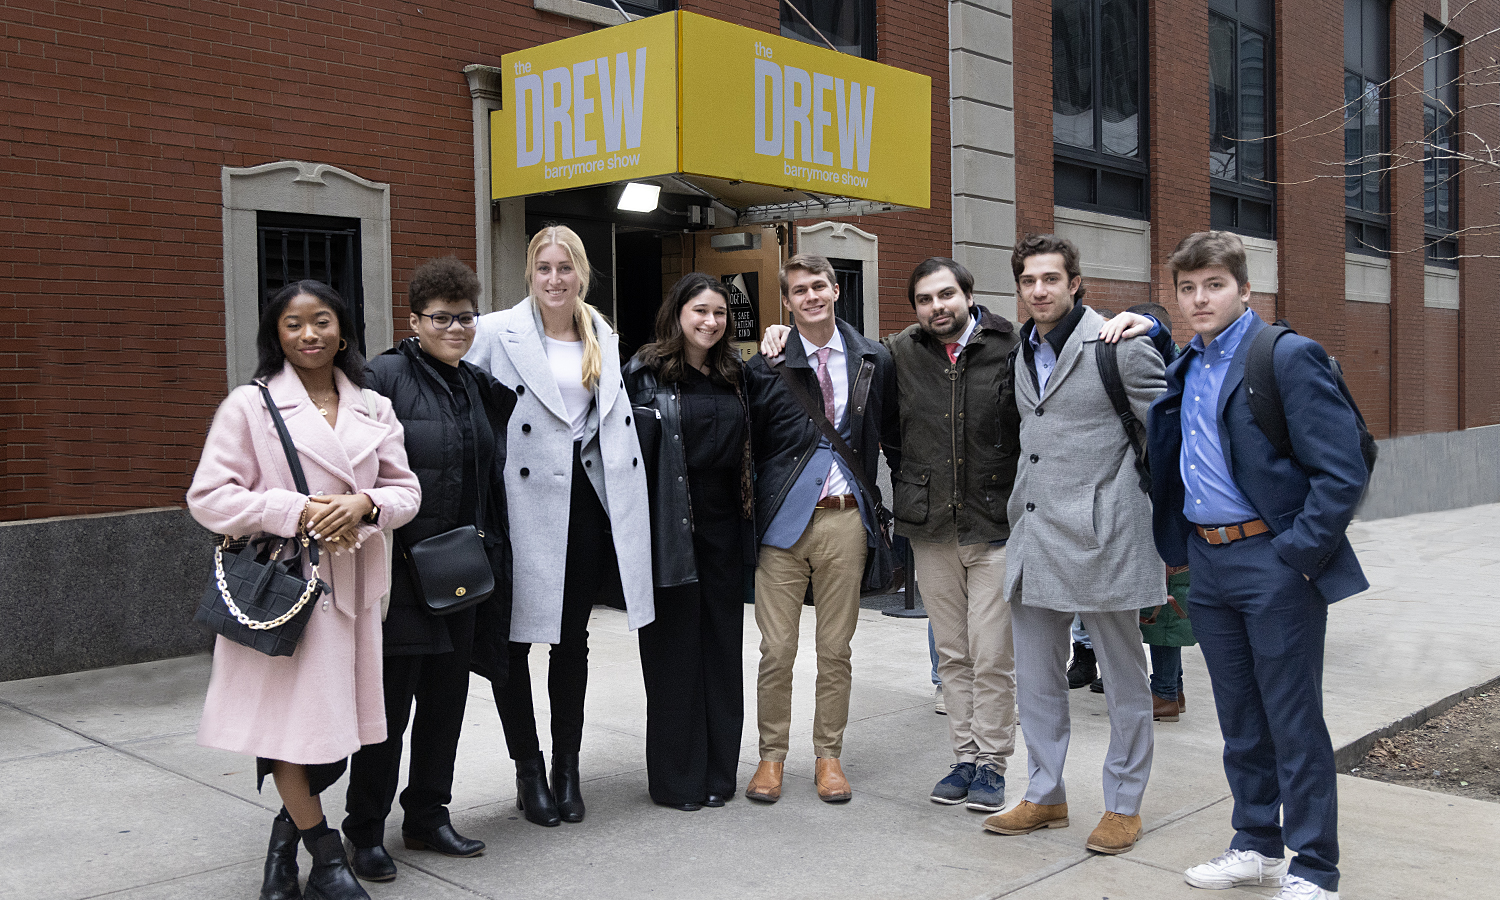 During the Behind the Scenes career event, Yashimabet Drummond ’24, A. King ’25, Julia Berg ’23, Alexandra Kopcak ’23, Nate Williams ’23, Tyler Stimpson ’23, Jonah Alexander ’24 and Shane Shell ’25 visit the set of the Drew Barrymore Show.